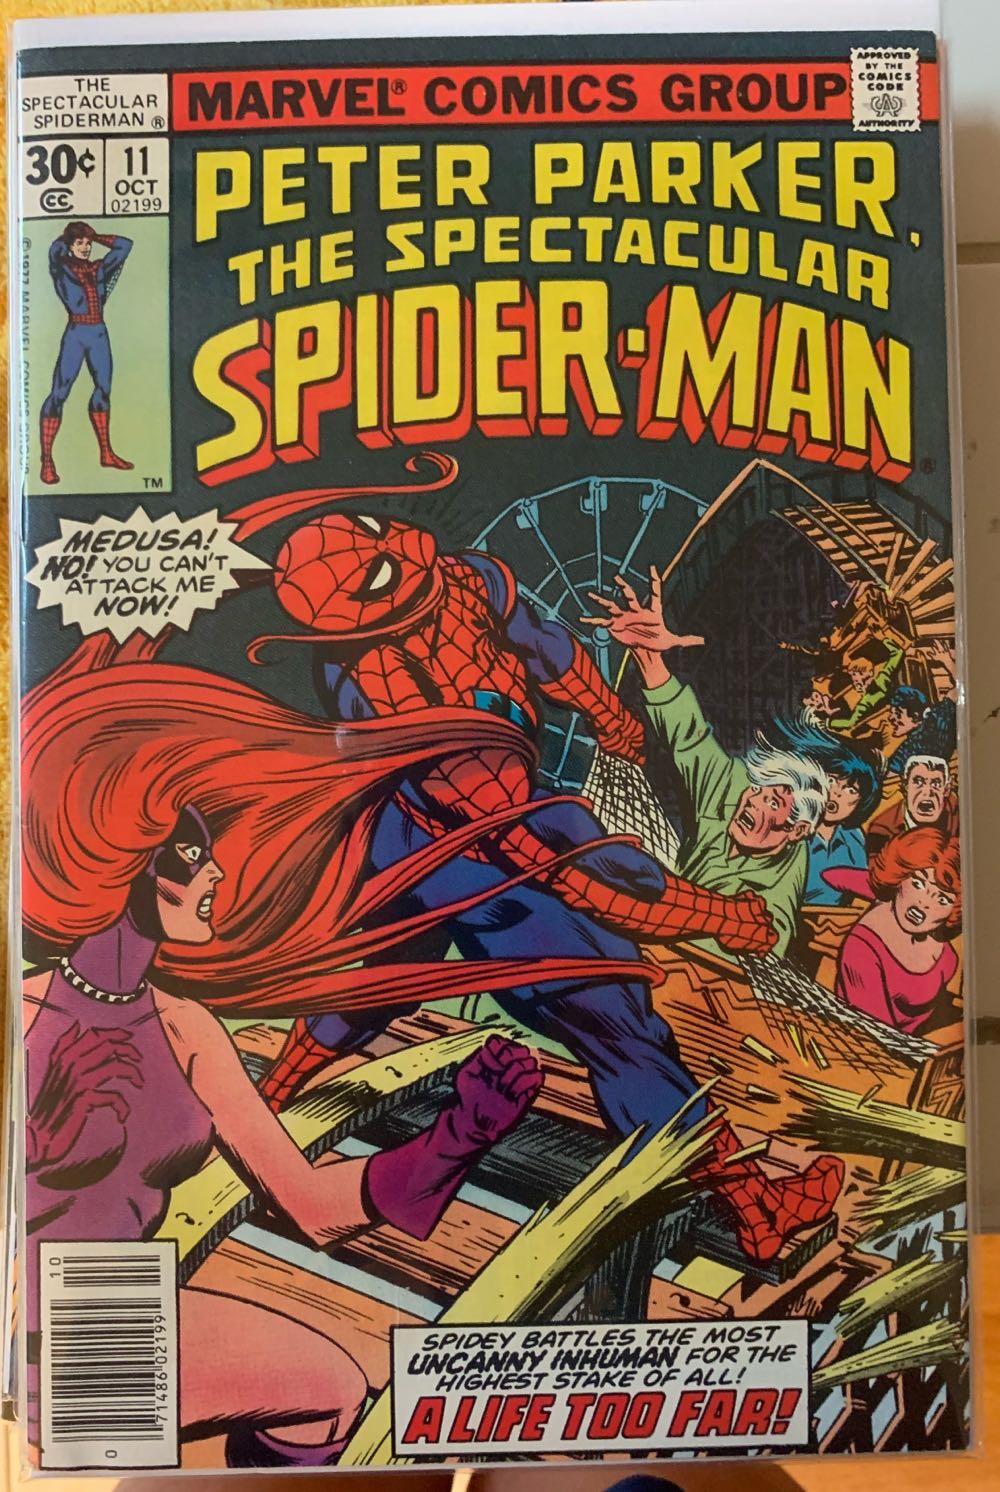 The Spectacular Spider-Man #11 - Marvel Comcs (11 - Oct 1977) comic book collectible [Barcode 071486021995] - Main Image 2